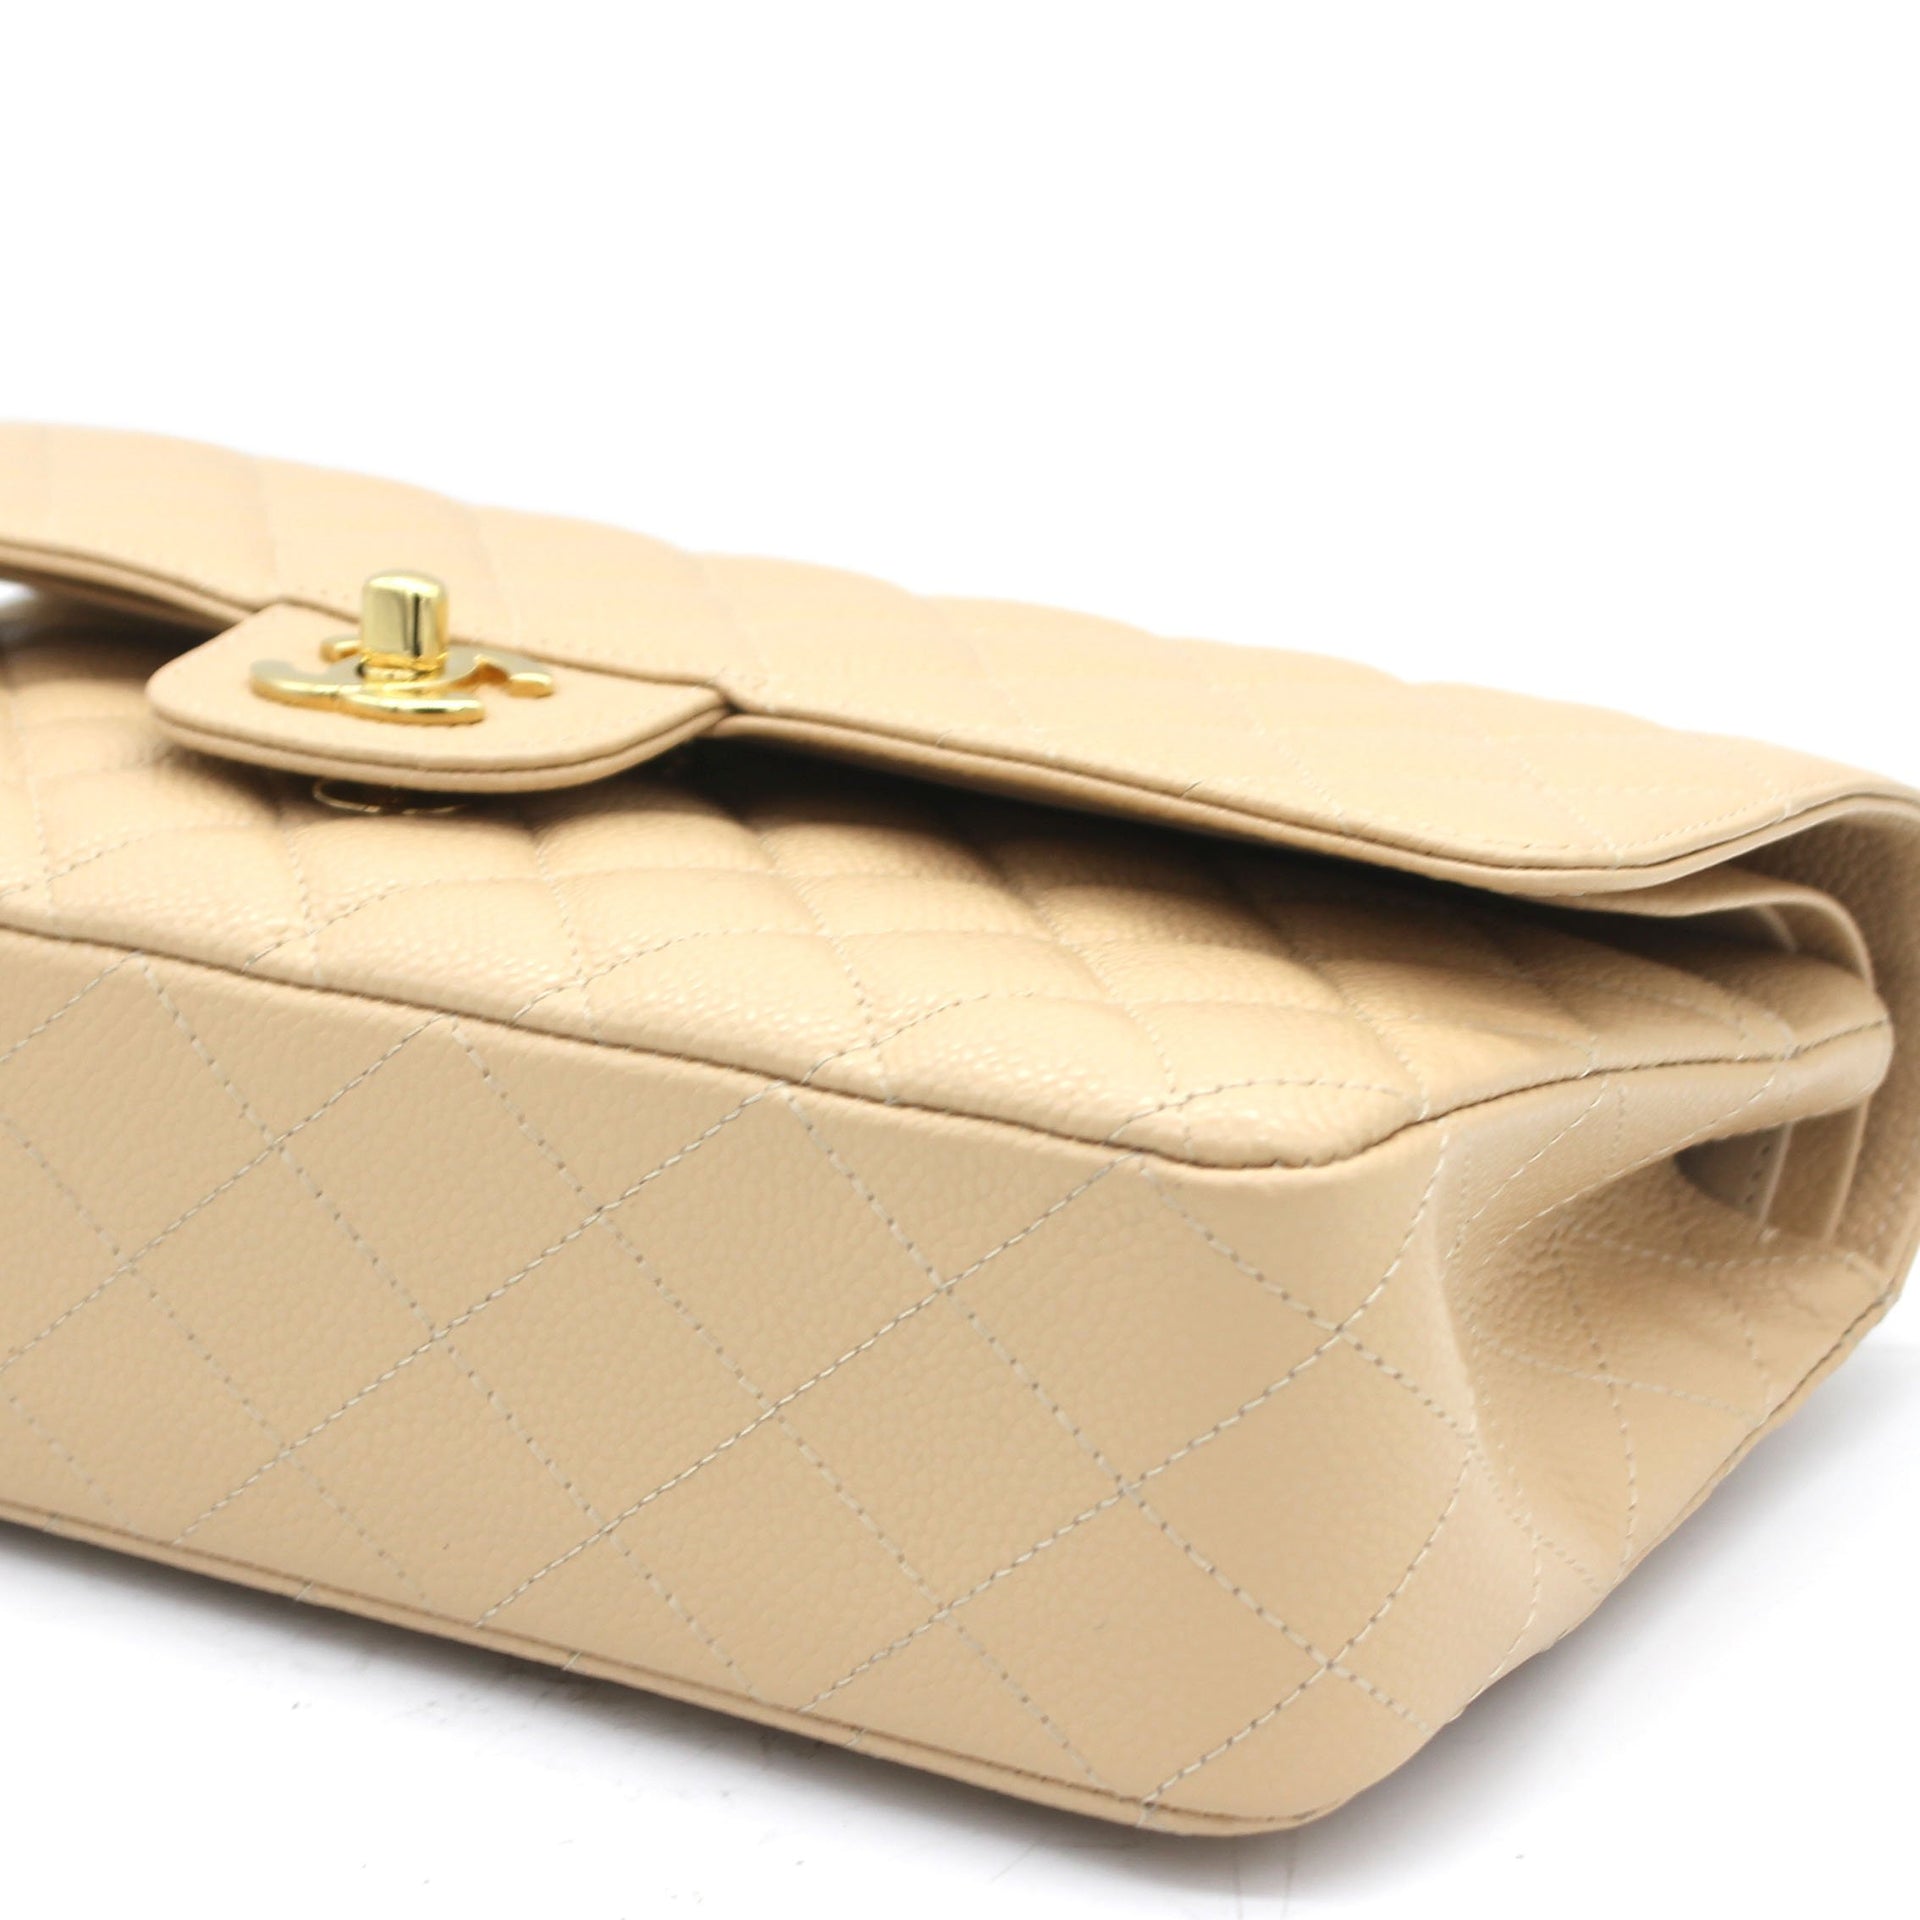 Beige Quilted Caviar Leather Classic Double Flap Bag